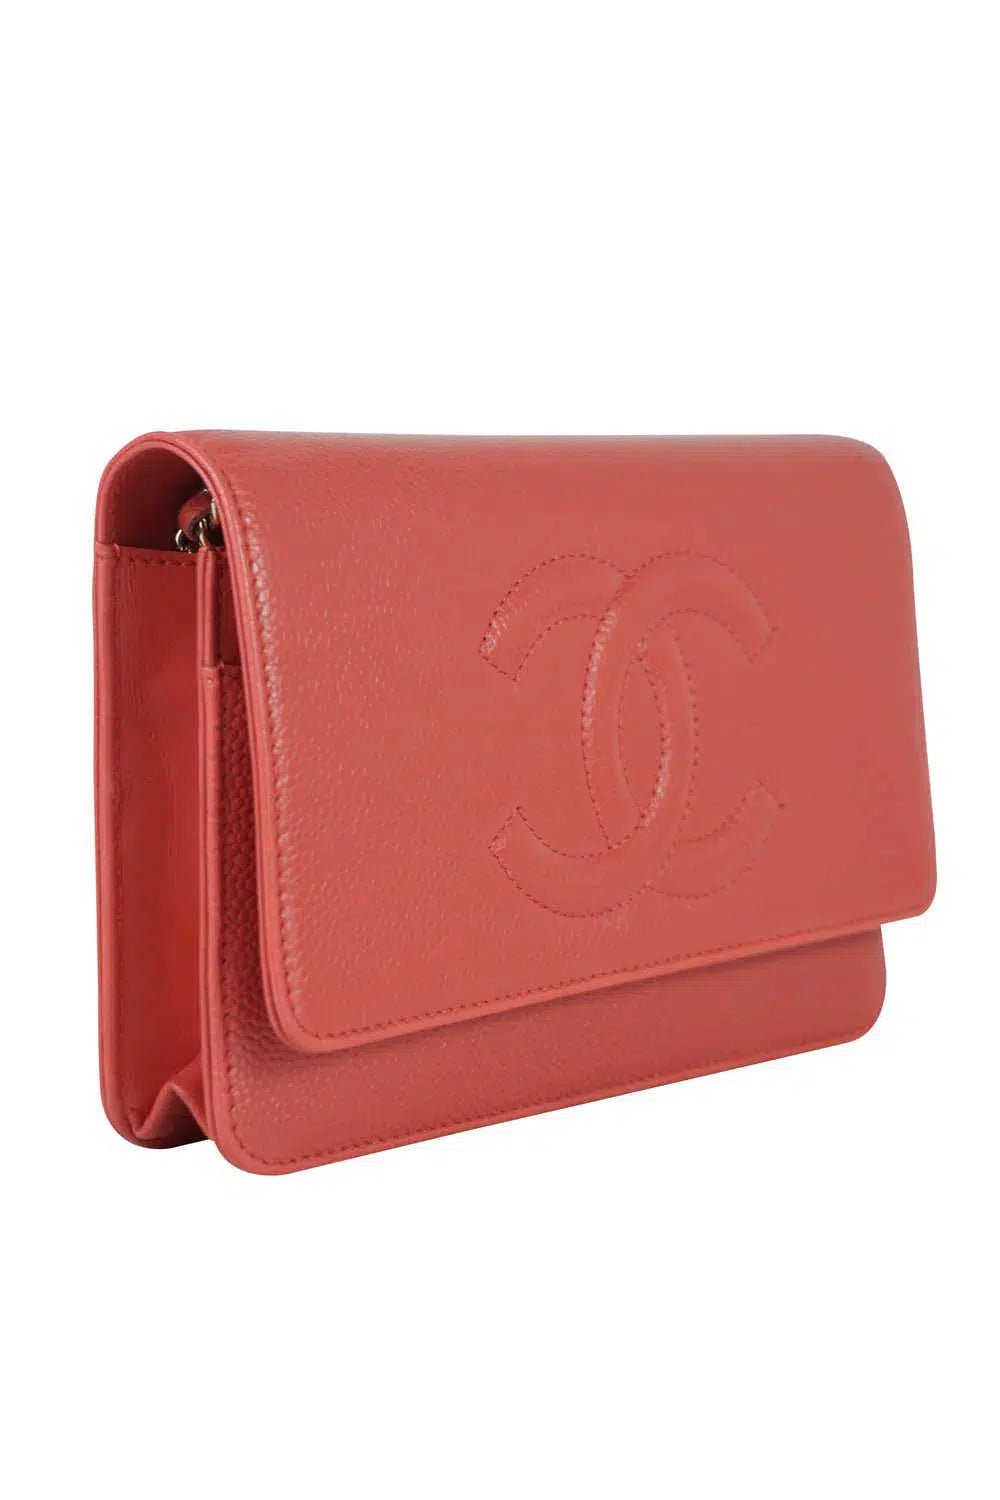 Chanel Caviar Salmon Timeless Wallet on a Chain 2014-15